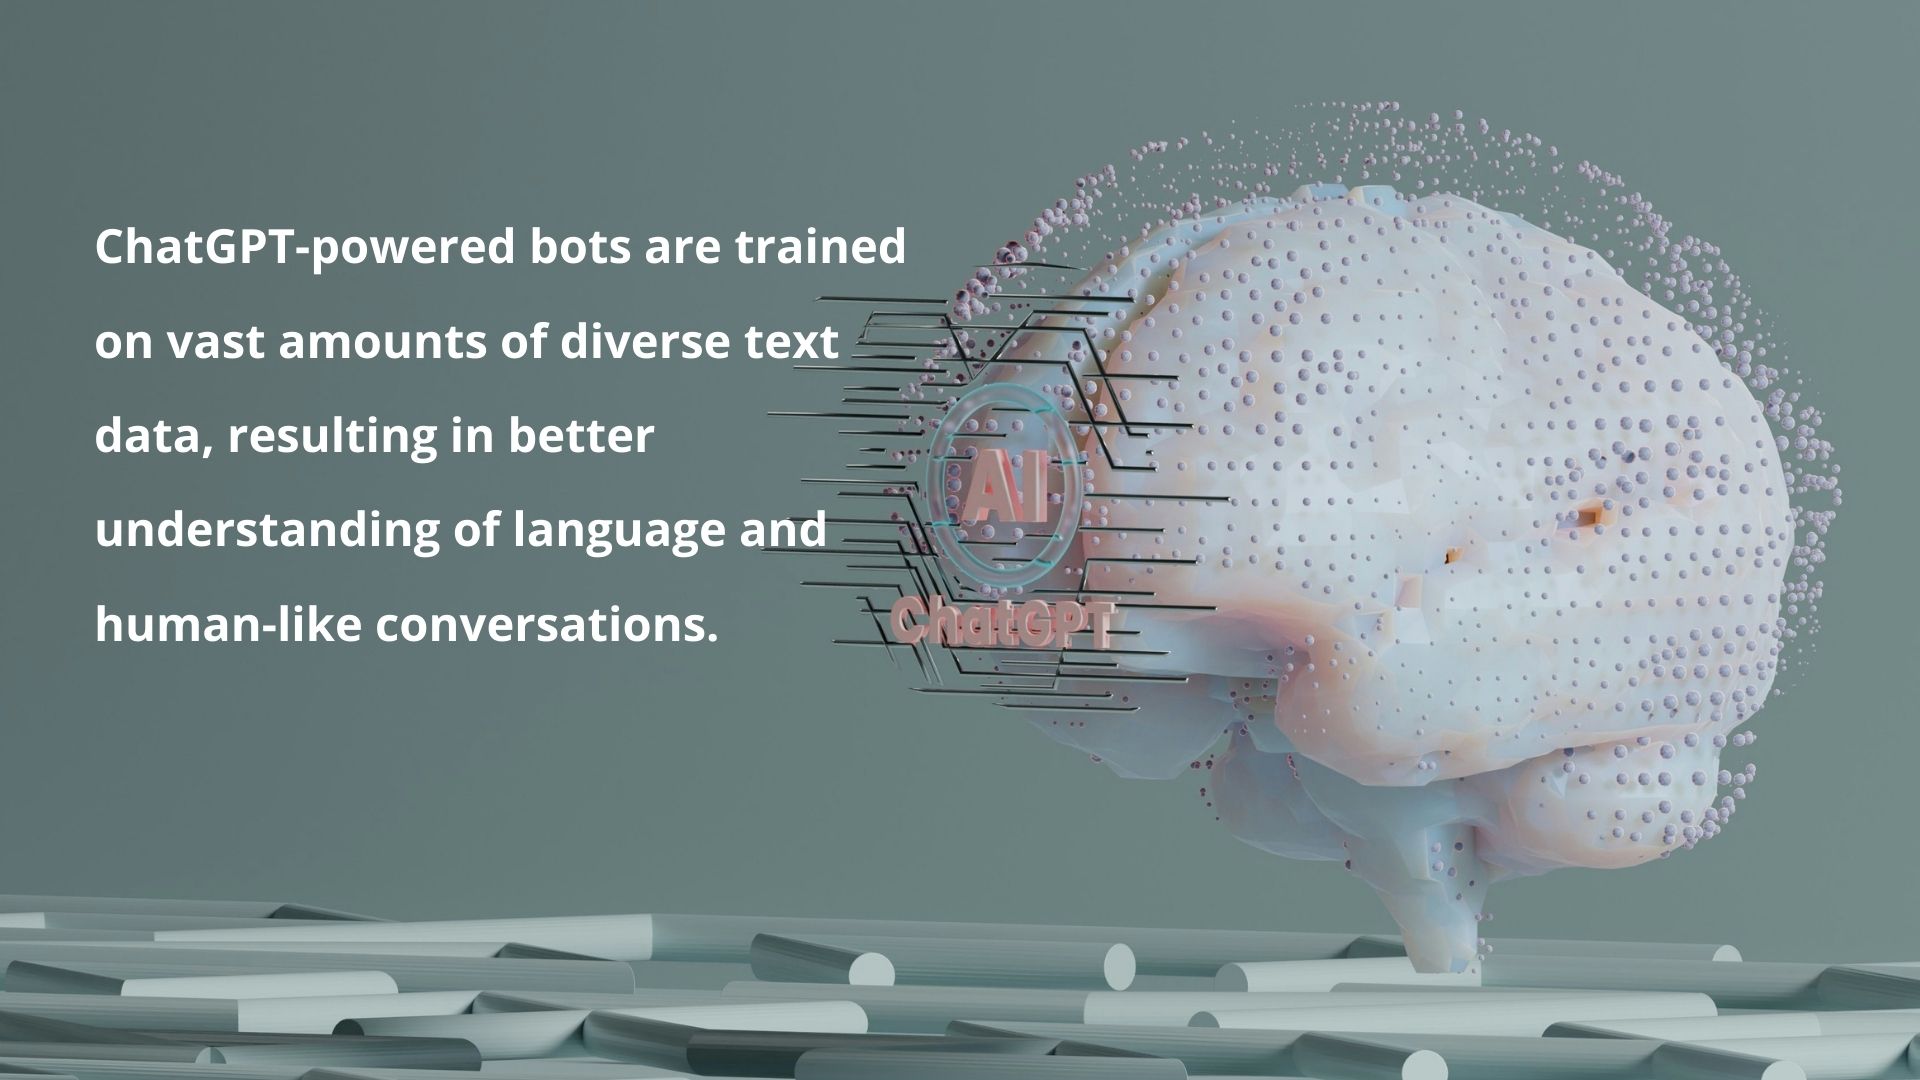 ChatGPT-powered bots are trained on vast amounts of diverse text data, resulting in better understanding of language and human-like conversations.